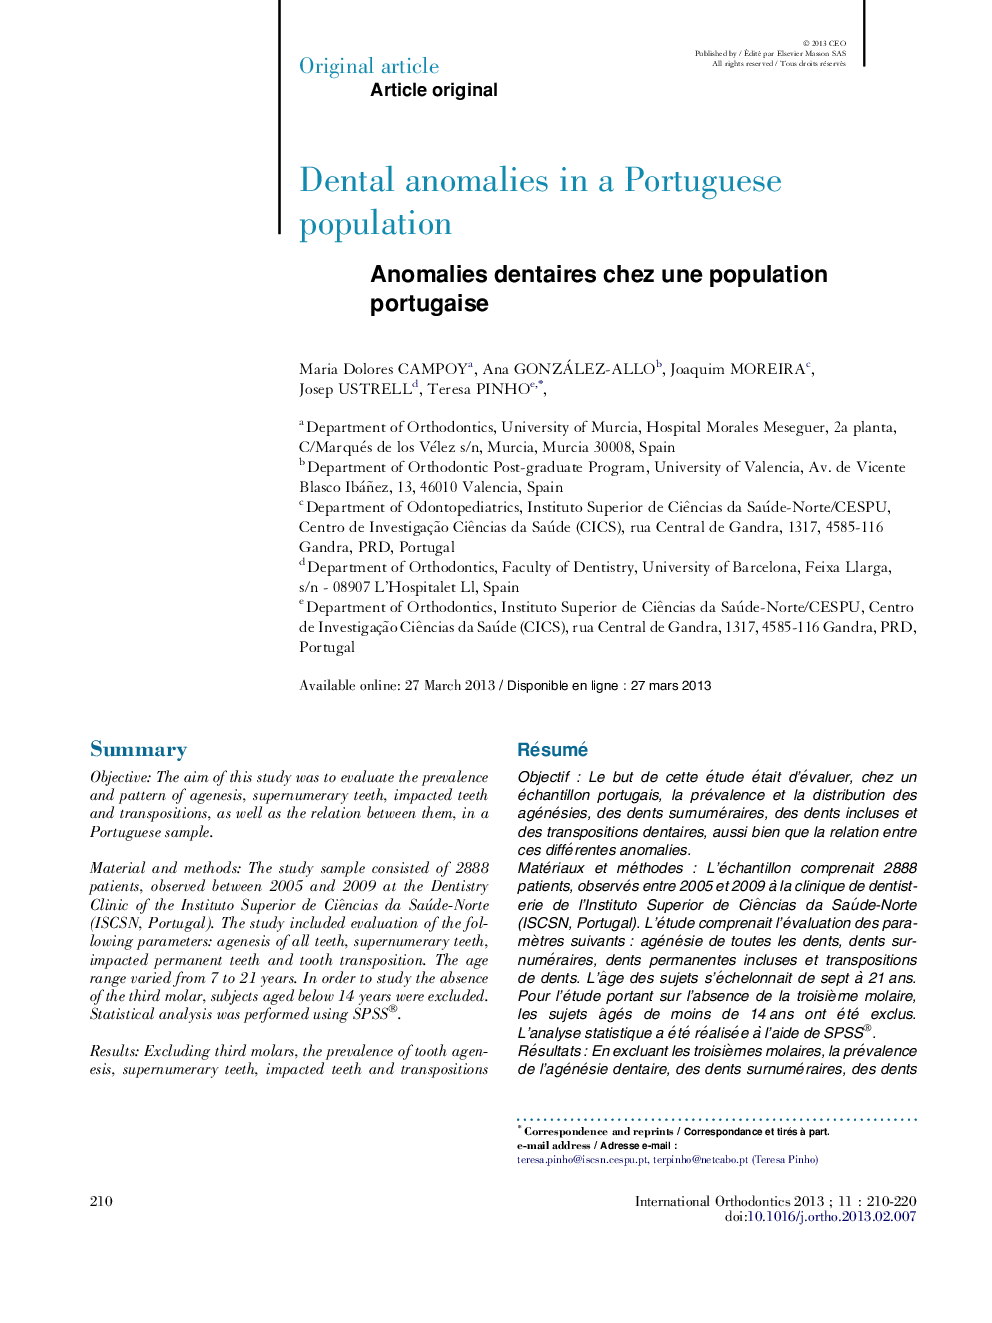 Dental anomalies in a Portuguese population